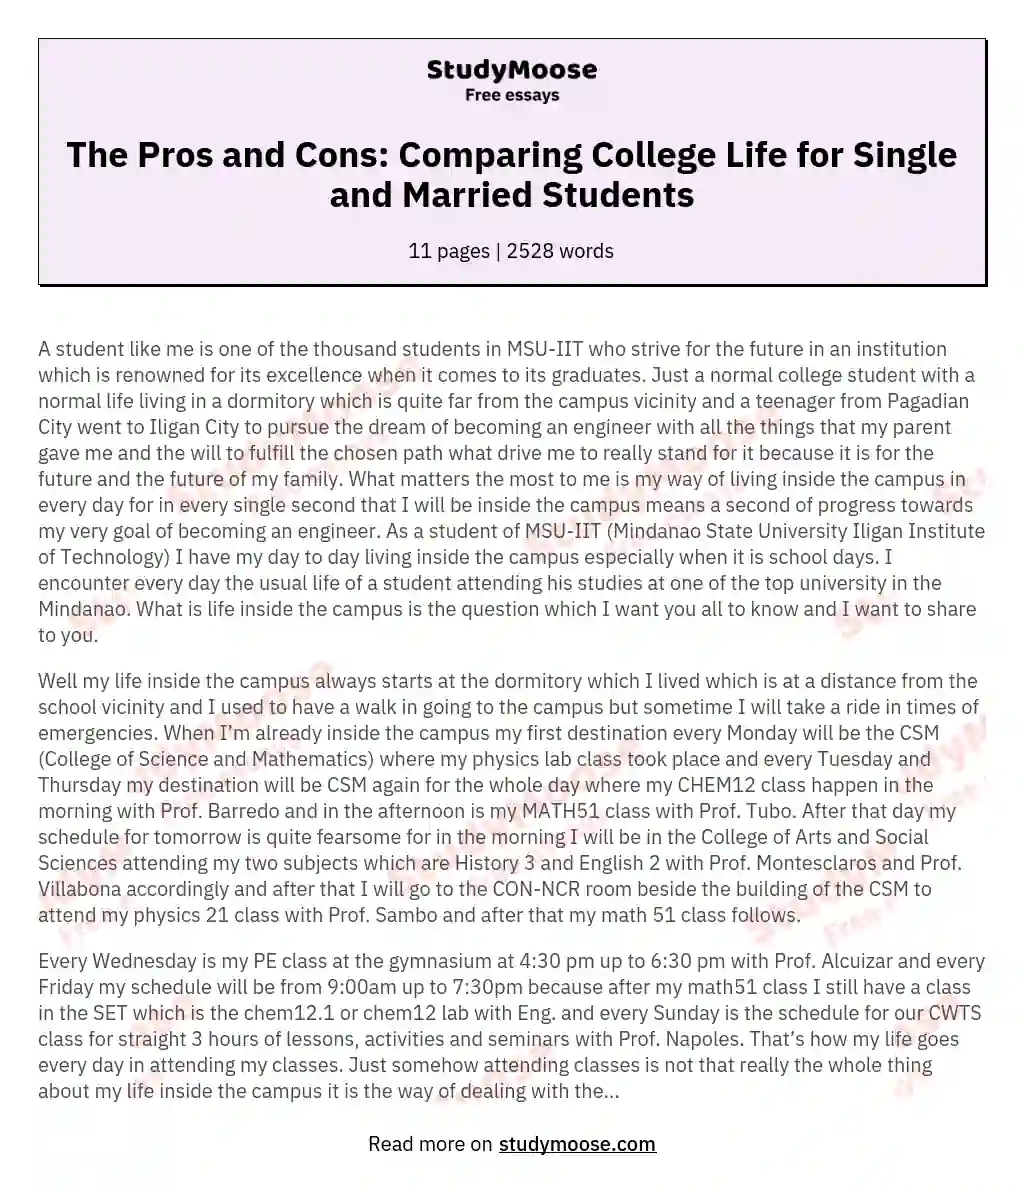 The Pros and Cons: Comparing College Life for Single and Married Students essay